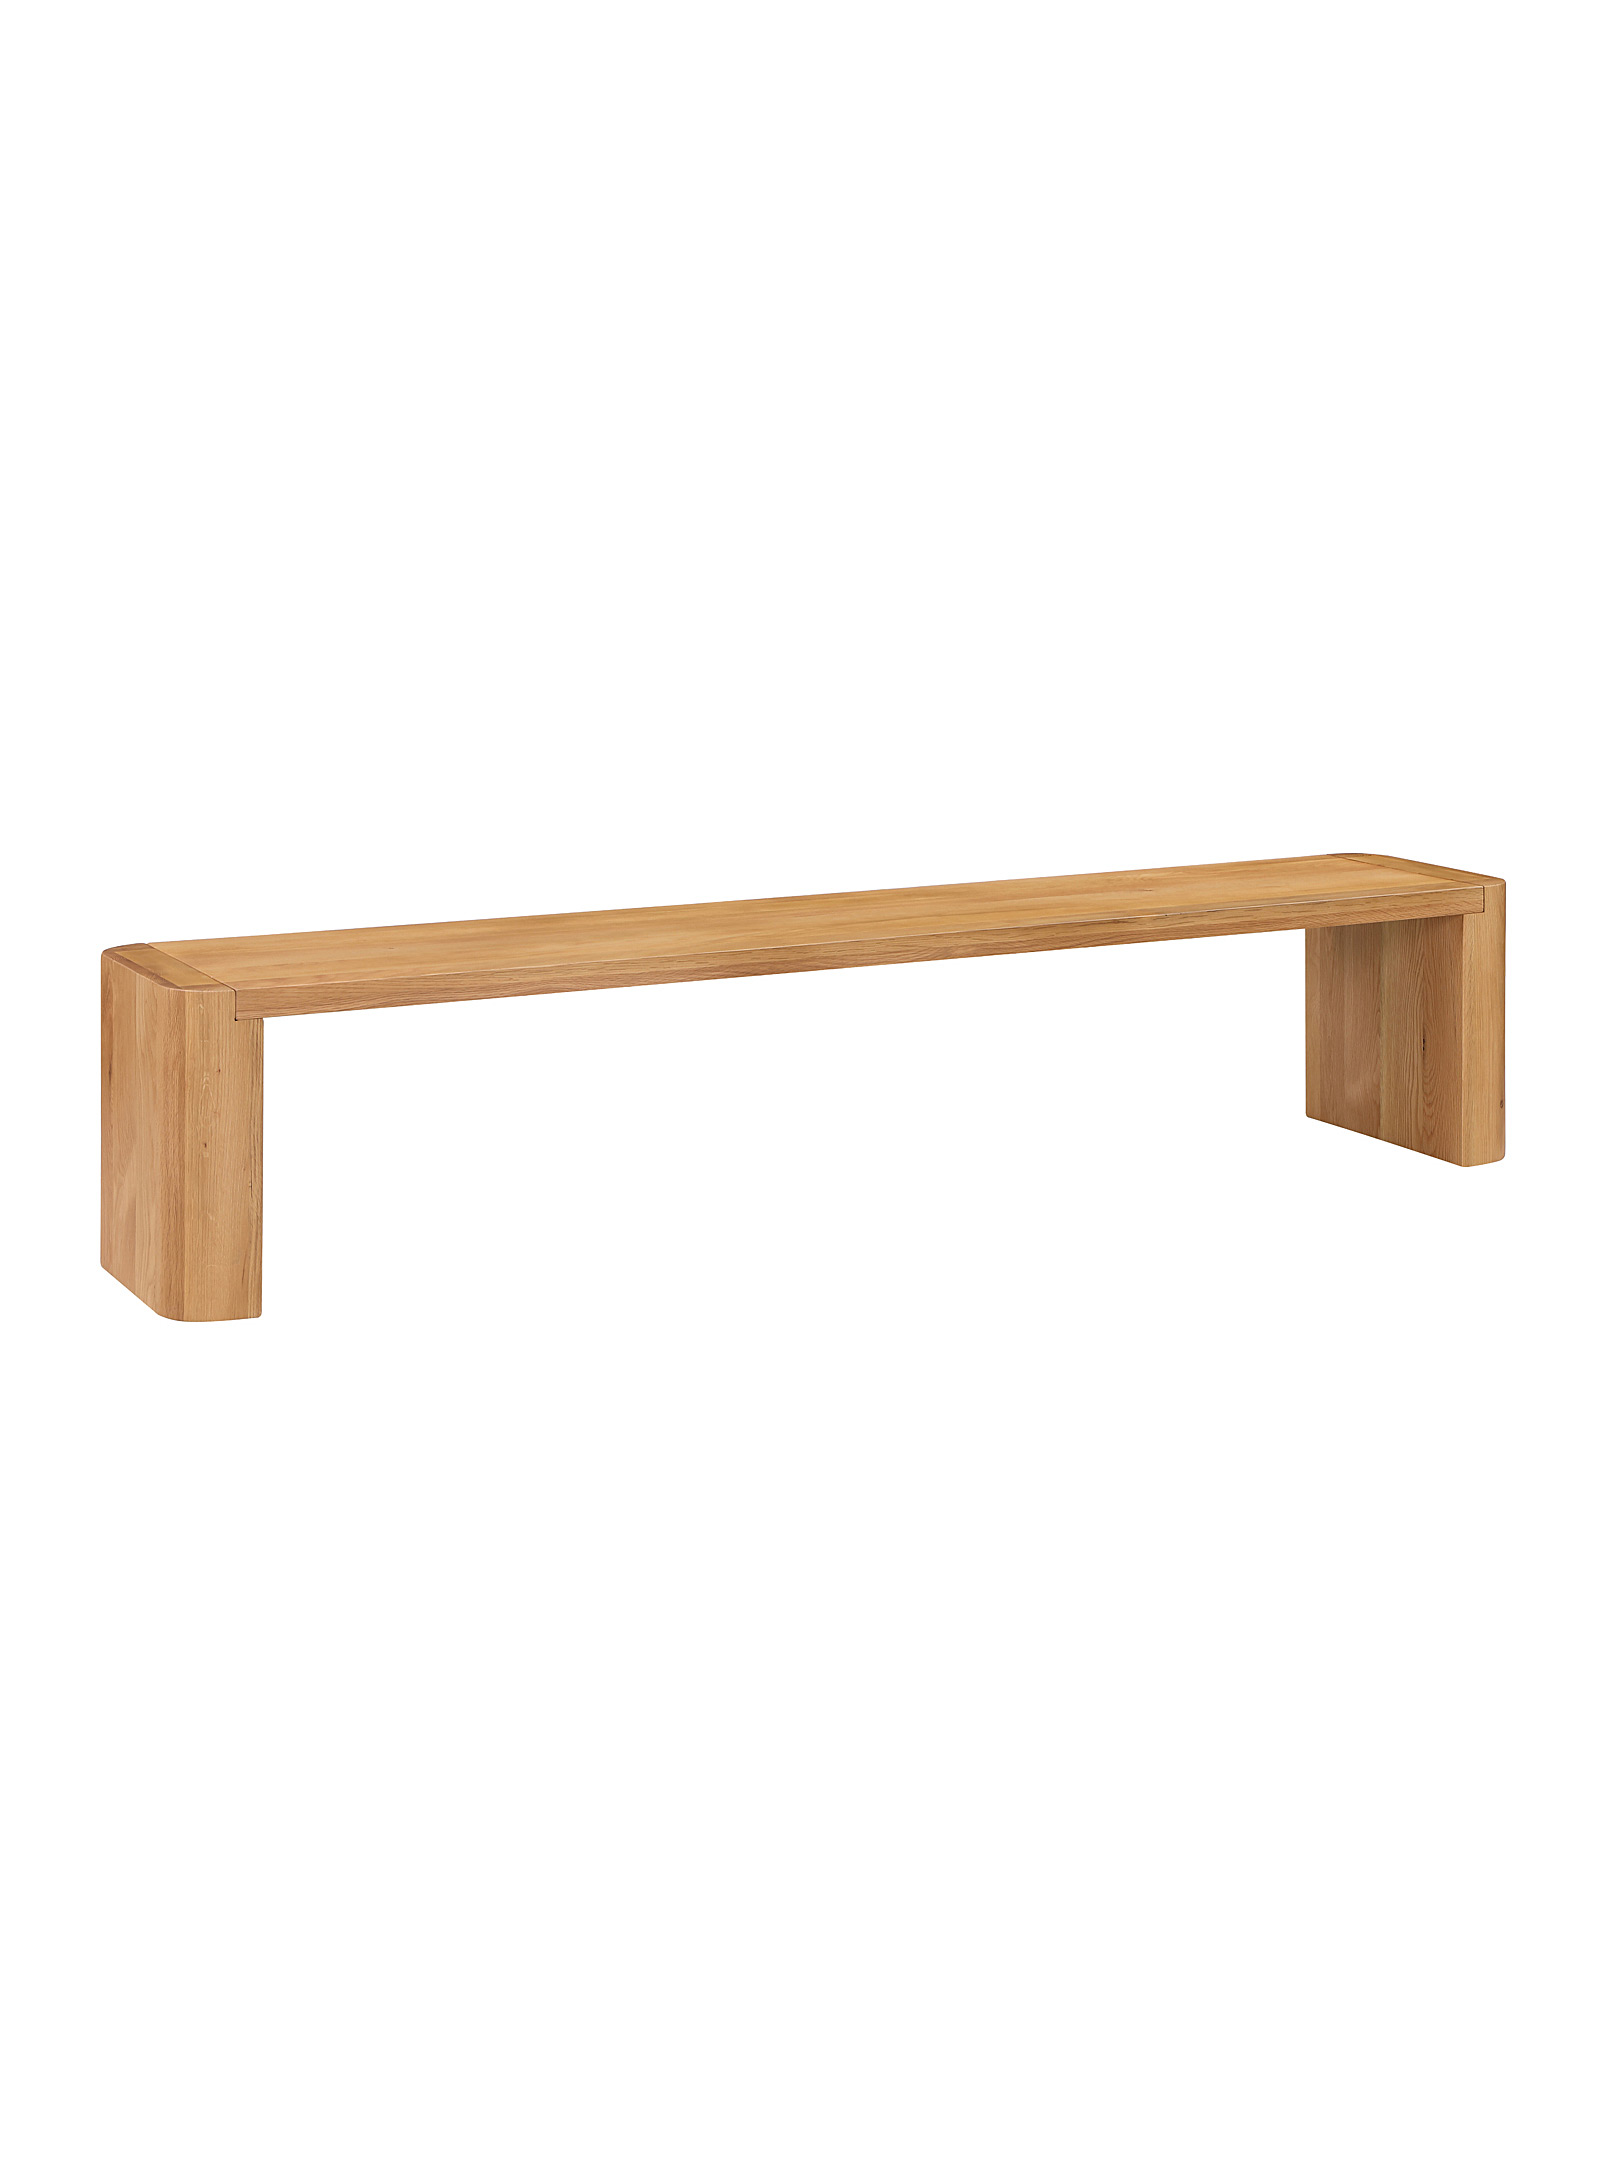 Moe's Home Collection - Large Post natural-finish oak wood bench